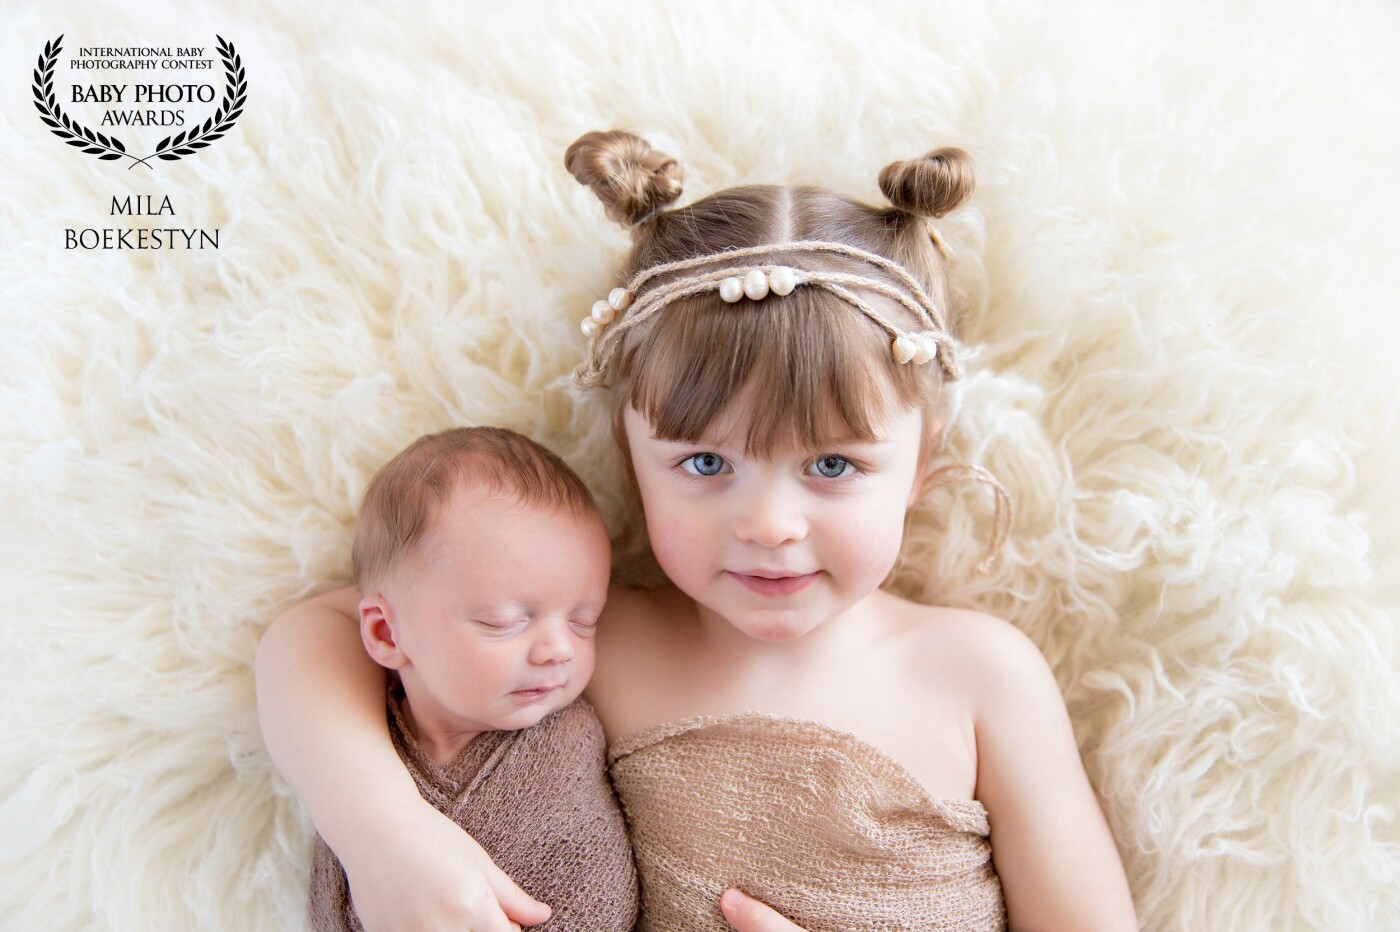 These siblings are 2 years apart and as every newborn photographer knows, it could be challenging to pose a 2 year old sibling with a newborn, however this big sister was super patient, caring and super gentle with her baby brother.  "I got you little brother" 